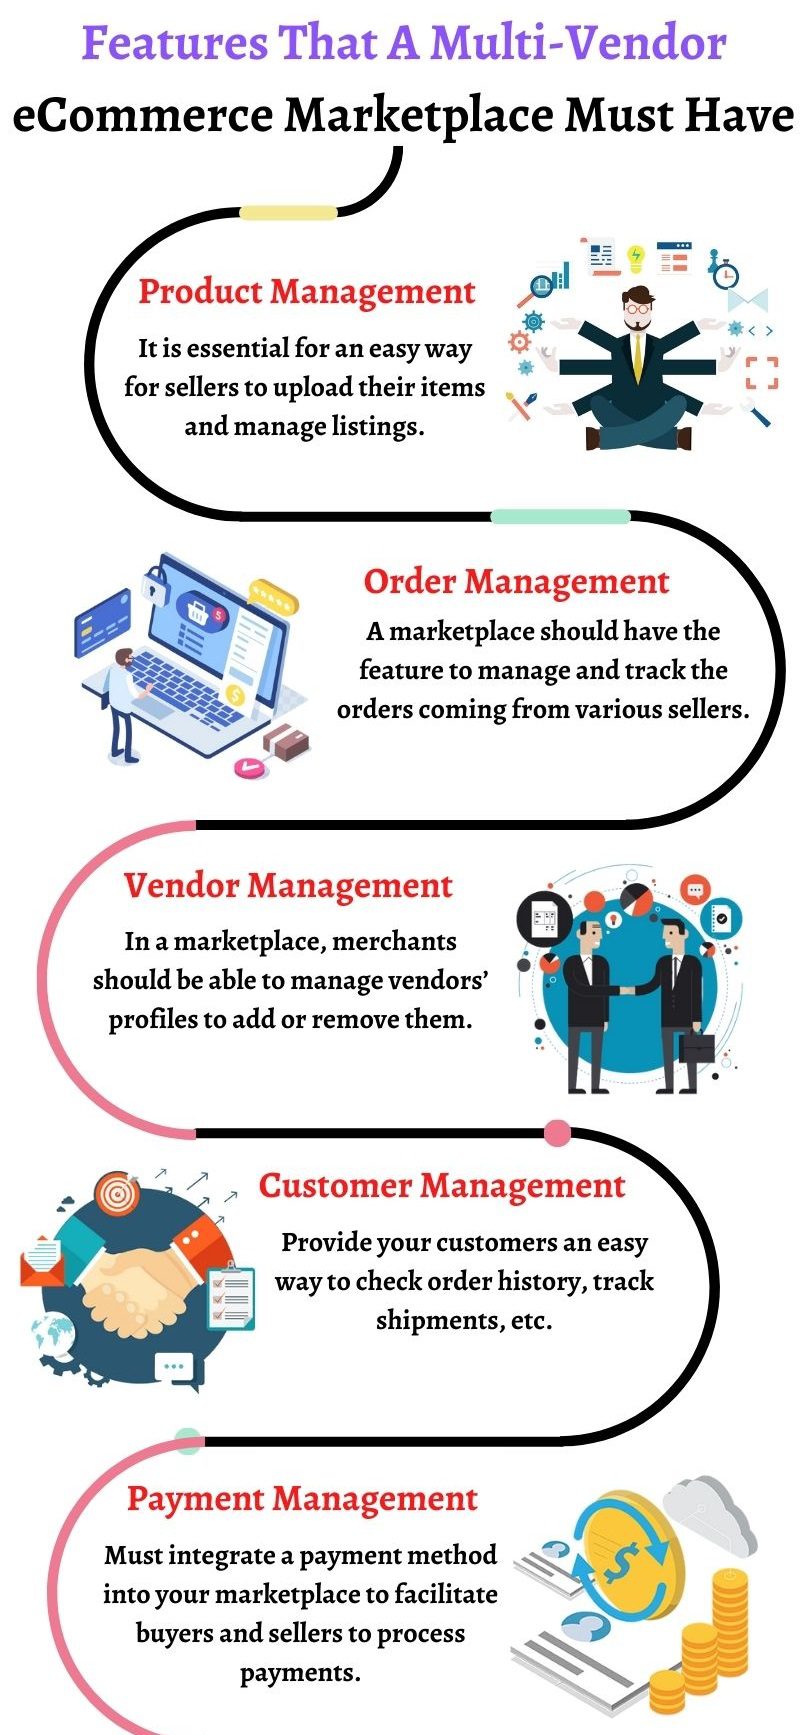 Features That A Multi-Vendor eCommerce Marketplace Must Have